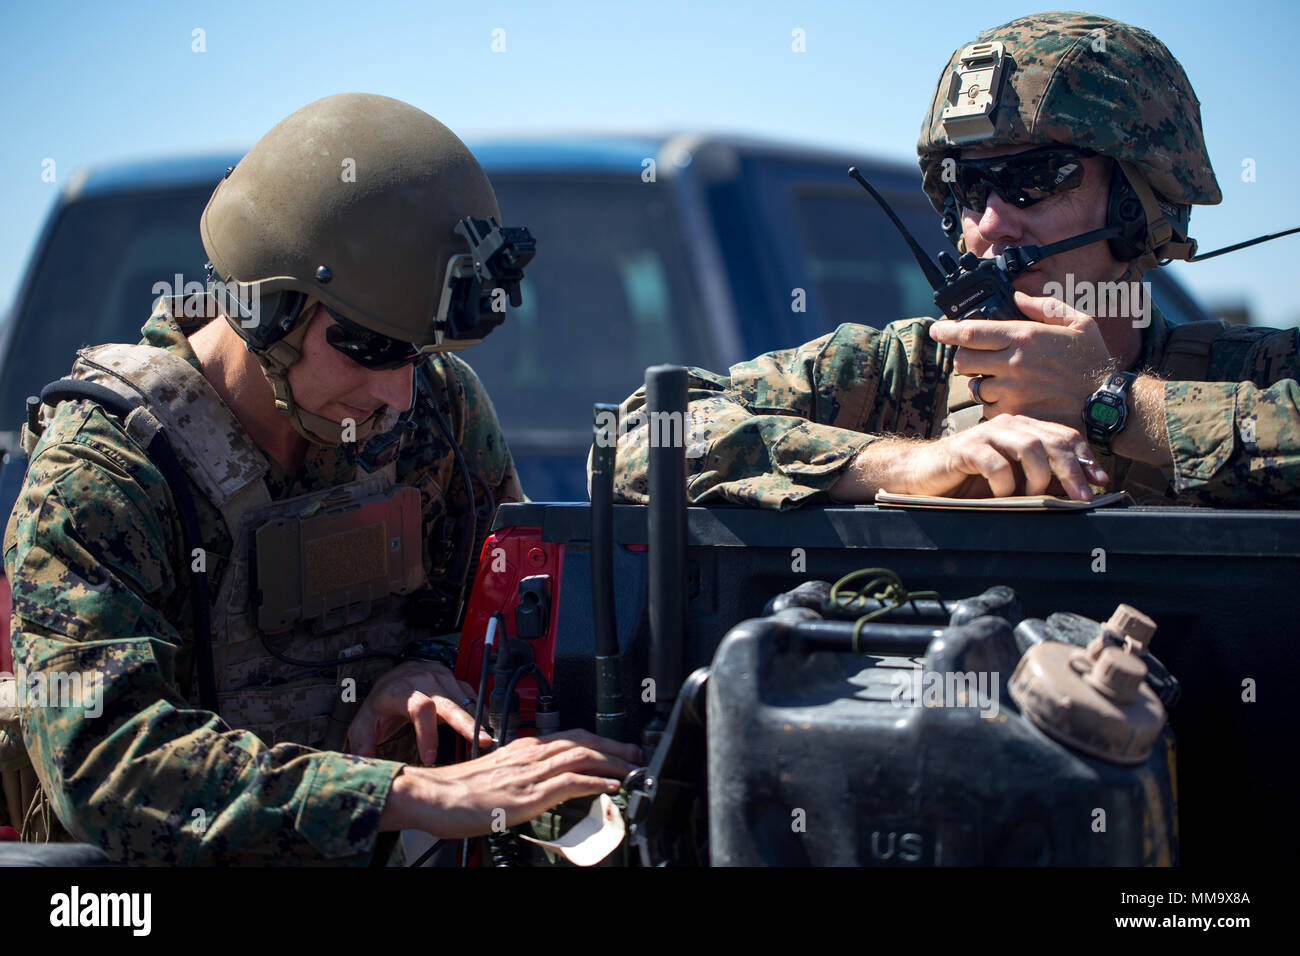 U.S Marine Corps Maj. Josh Foster, Air Ordnance Disposal Instructor, left, and Capt. David Hirt, AH-1 Instructor with Marine Aviation Weapons and Tactics Squadron One (MAWTS-1) provide digitally aided close air support using radios and tablets in support of Weapons Tactics Instructors course (WTI) 1-18 at Fire Base Burt, Calif., Sept. 22, 2017. WTI is a seven-week training even hosted by MAWTS-1 cadre, which emphasizes operational integration of the six functions of Marine Corps aviation in support of a Marine Air Ground Task Force and provides standardized advance tactical training and certif Stock Photo